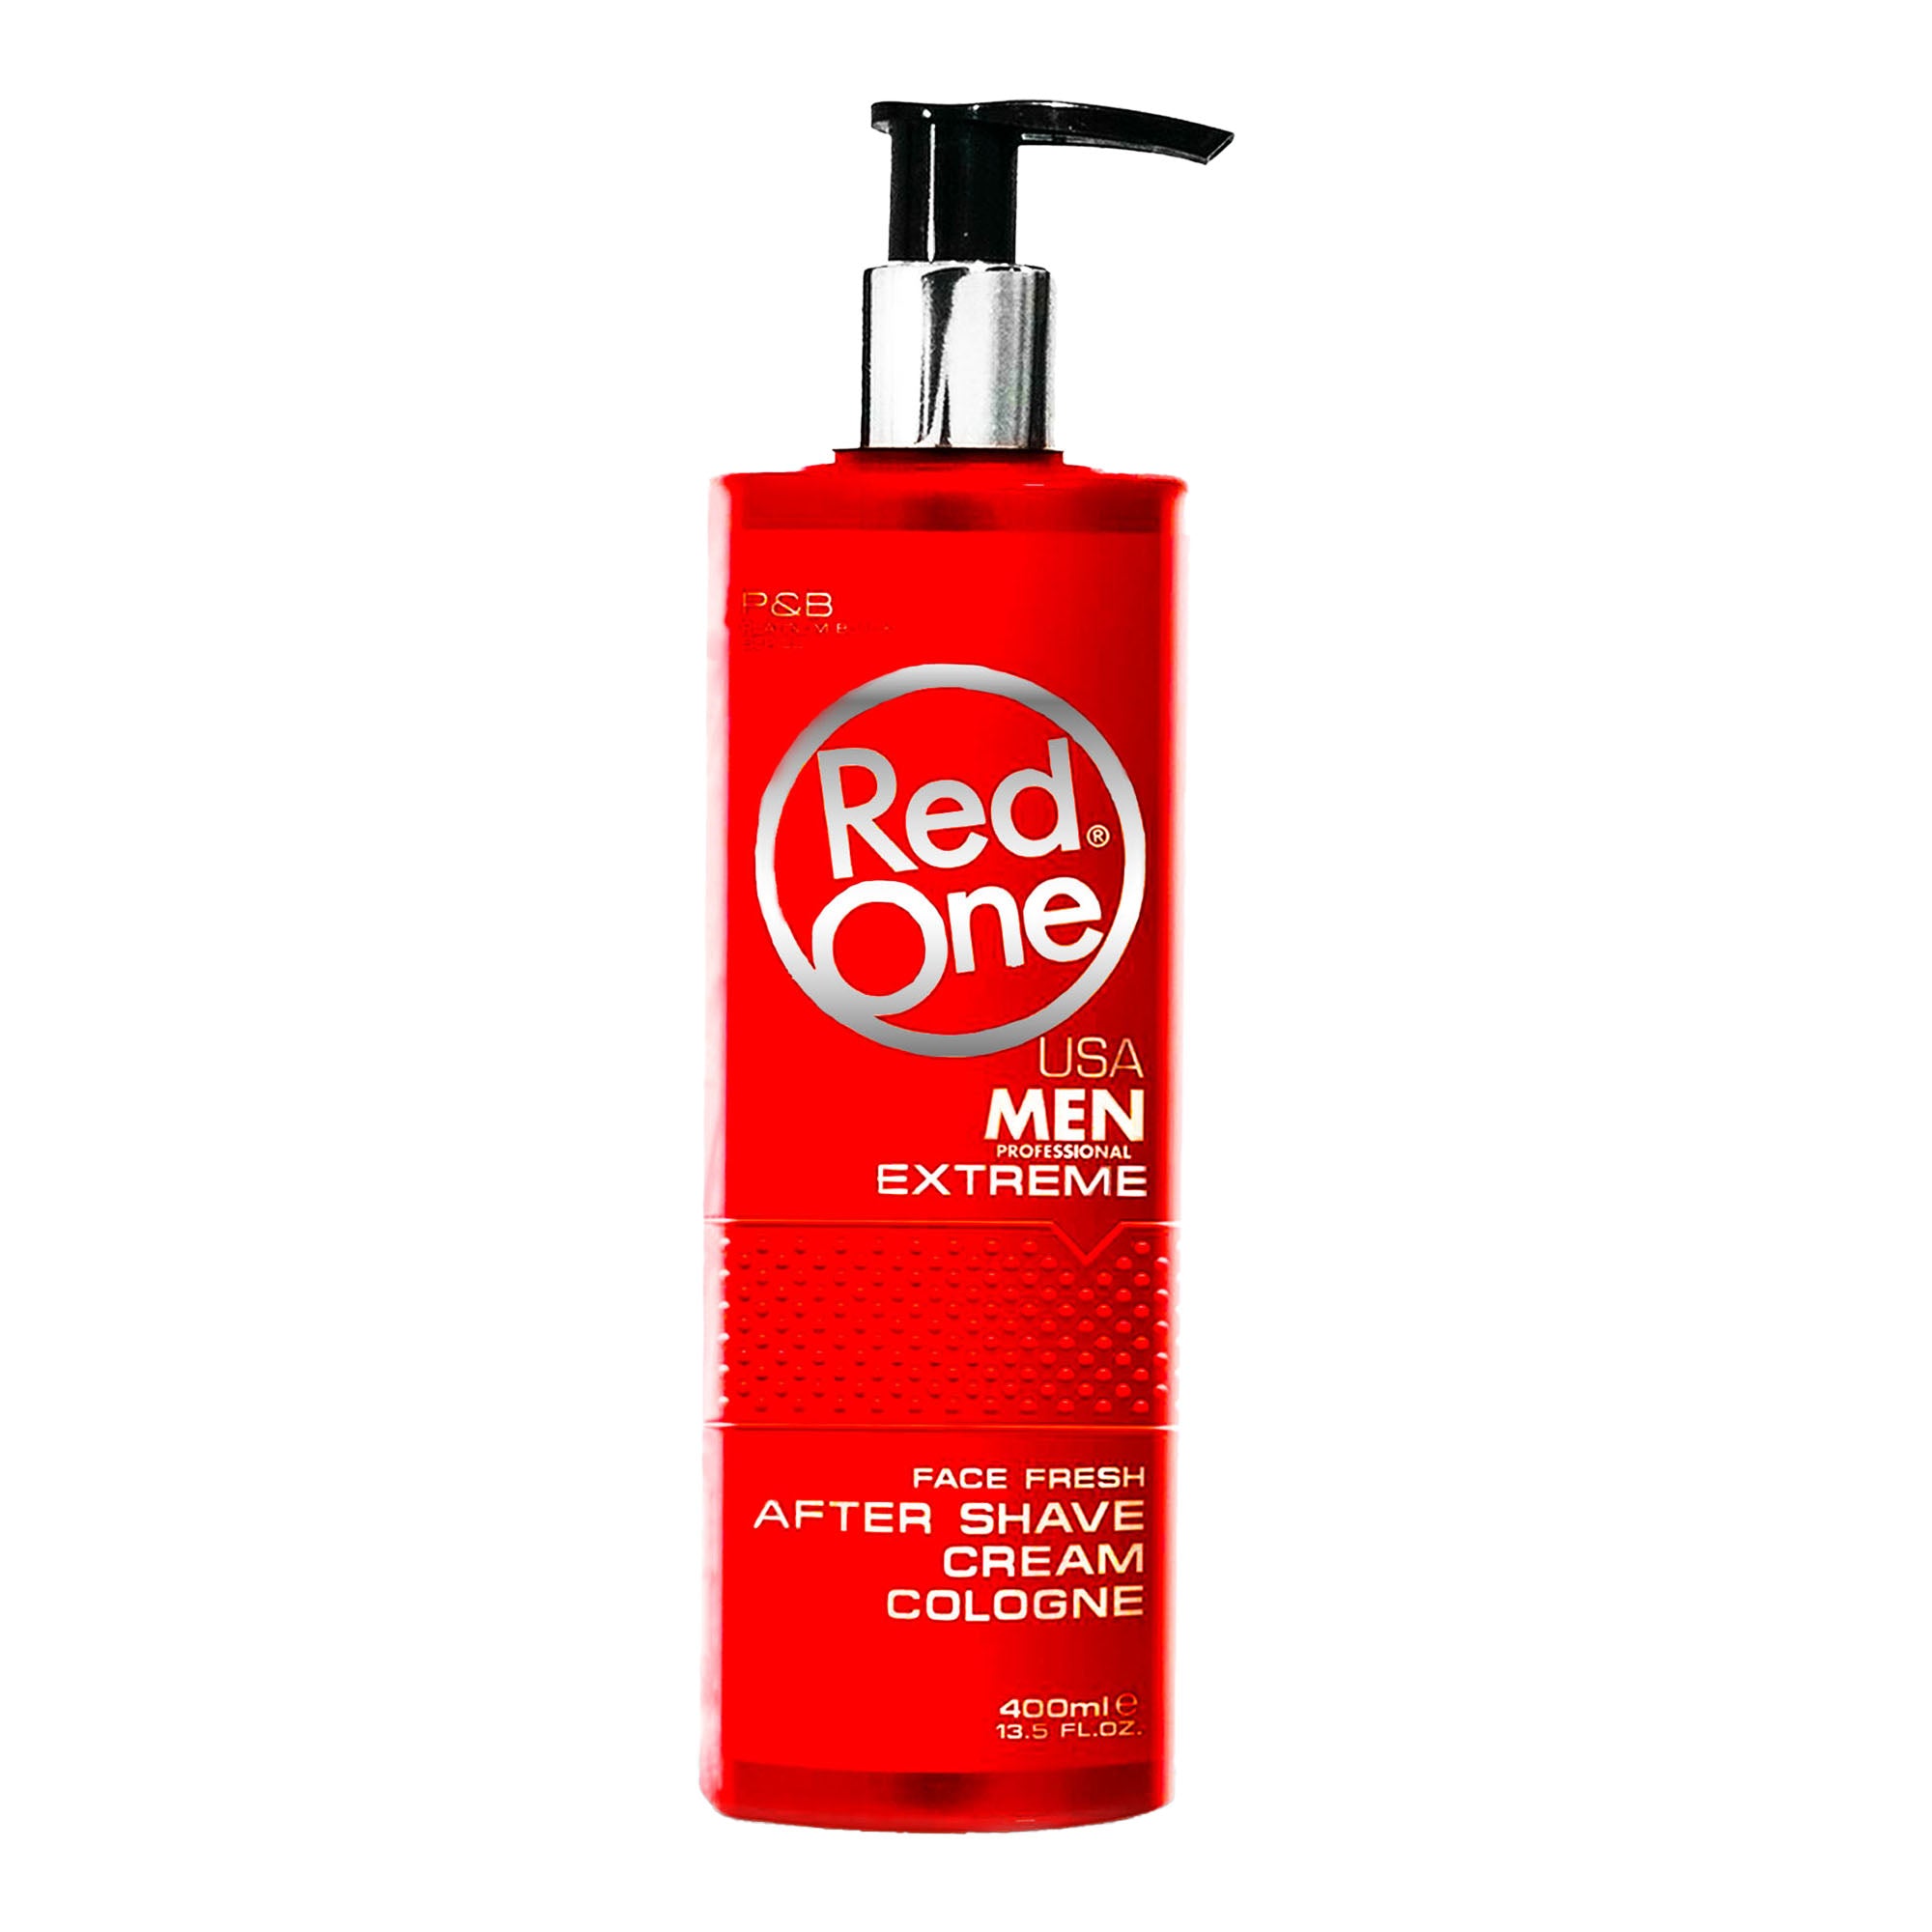 Redone - After Shave Cream Cologne Extreme 400ml